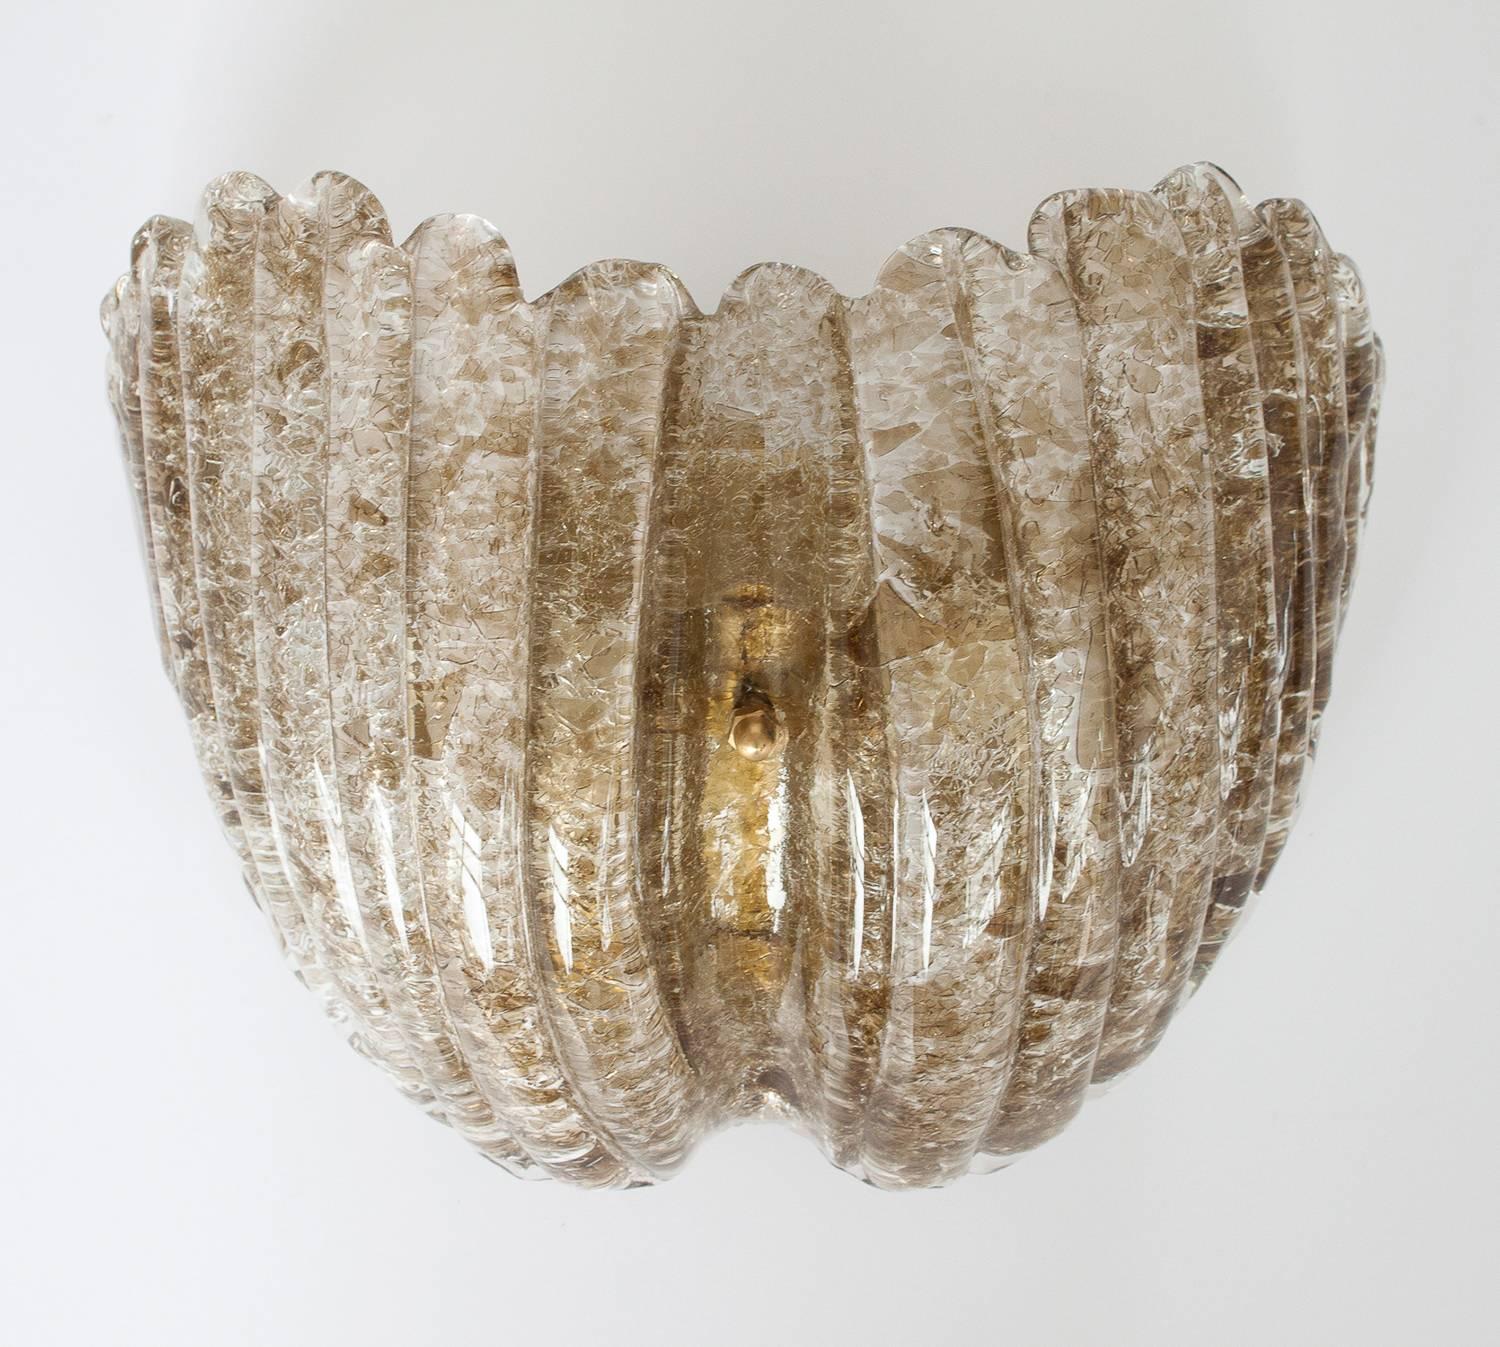 Pair of Kalmar shell form glass wall sconces in a smokey topaz color. Unique crackled ice glass. Brass hardware. Takes two E-14 base light bulbs. 4.25